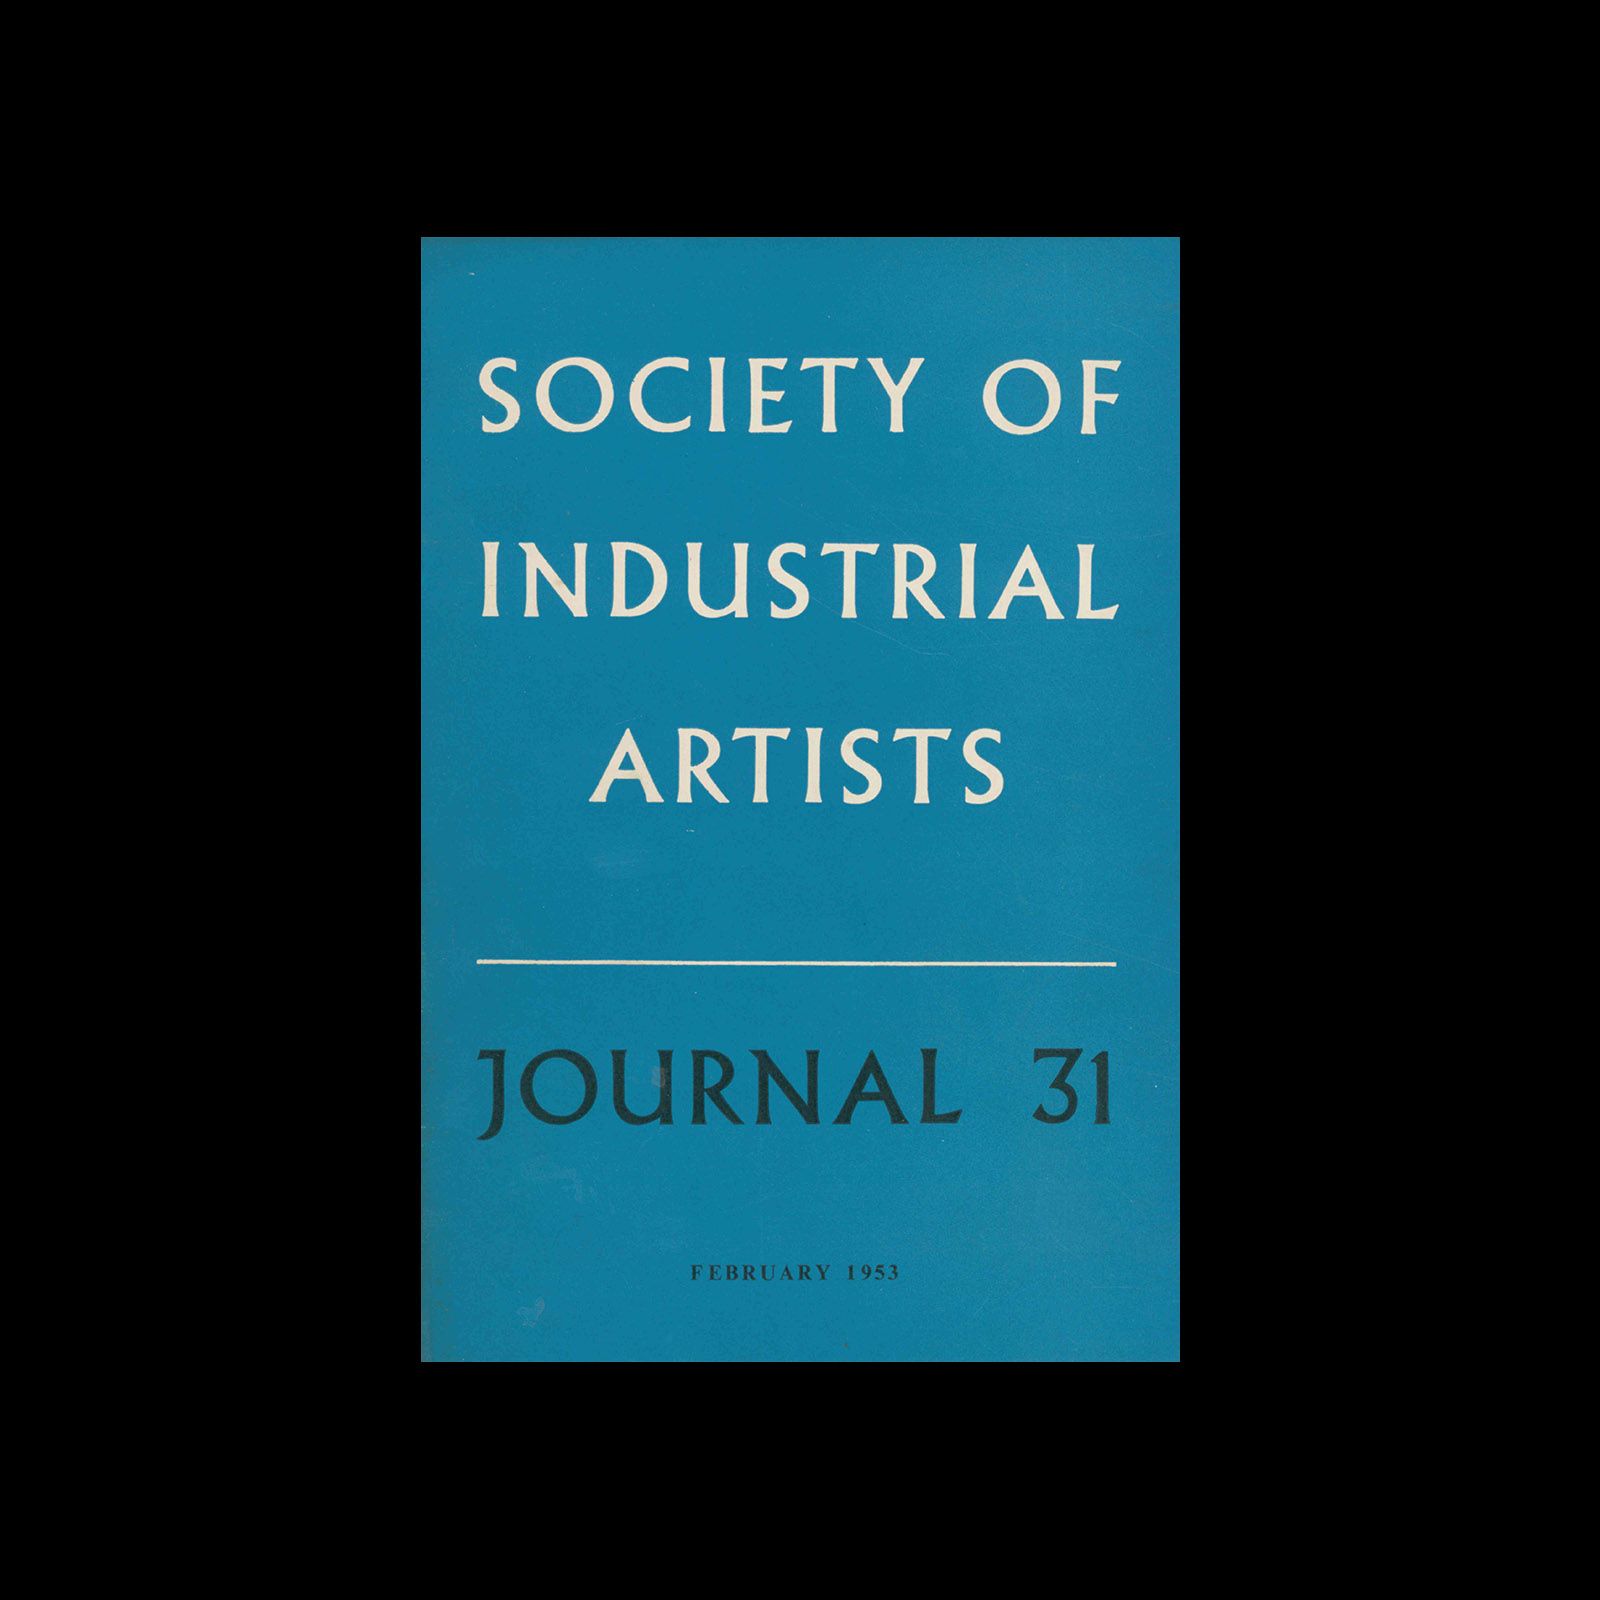 Society of Industrial Artists, 31, February 1953